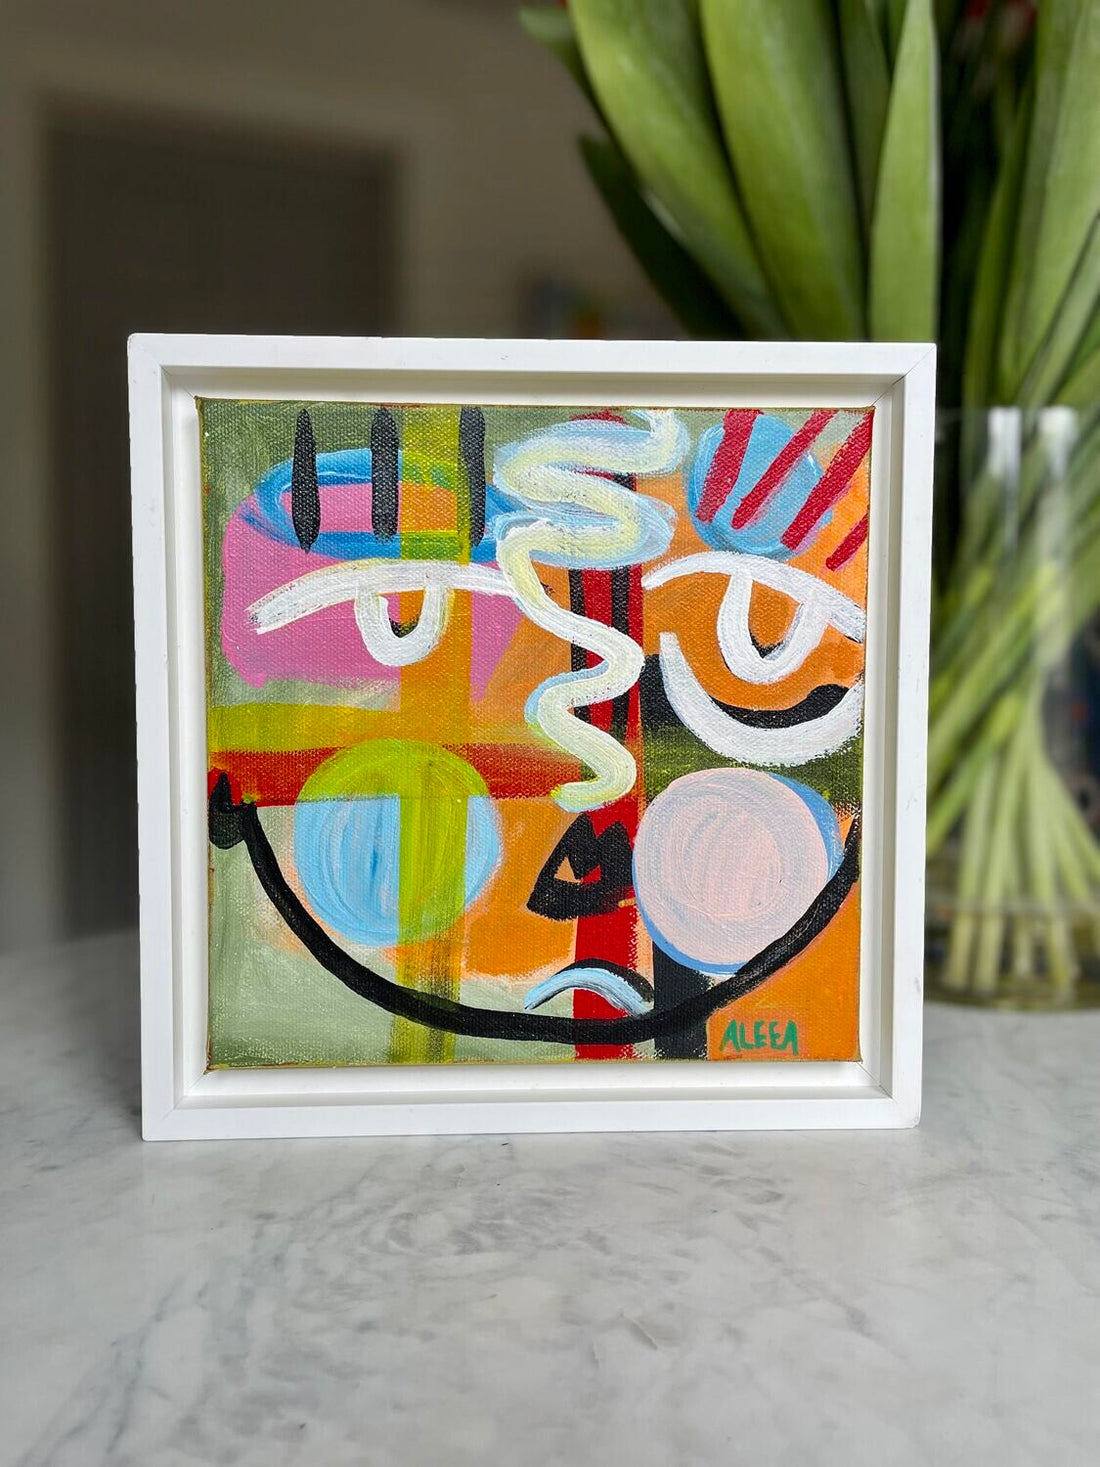 A framed colorful abstract portrait sits on a marble table in front of a vase of flowers.